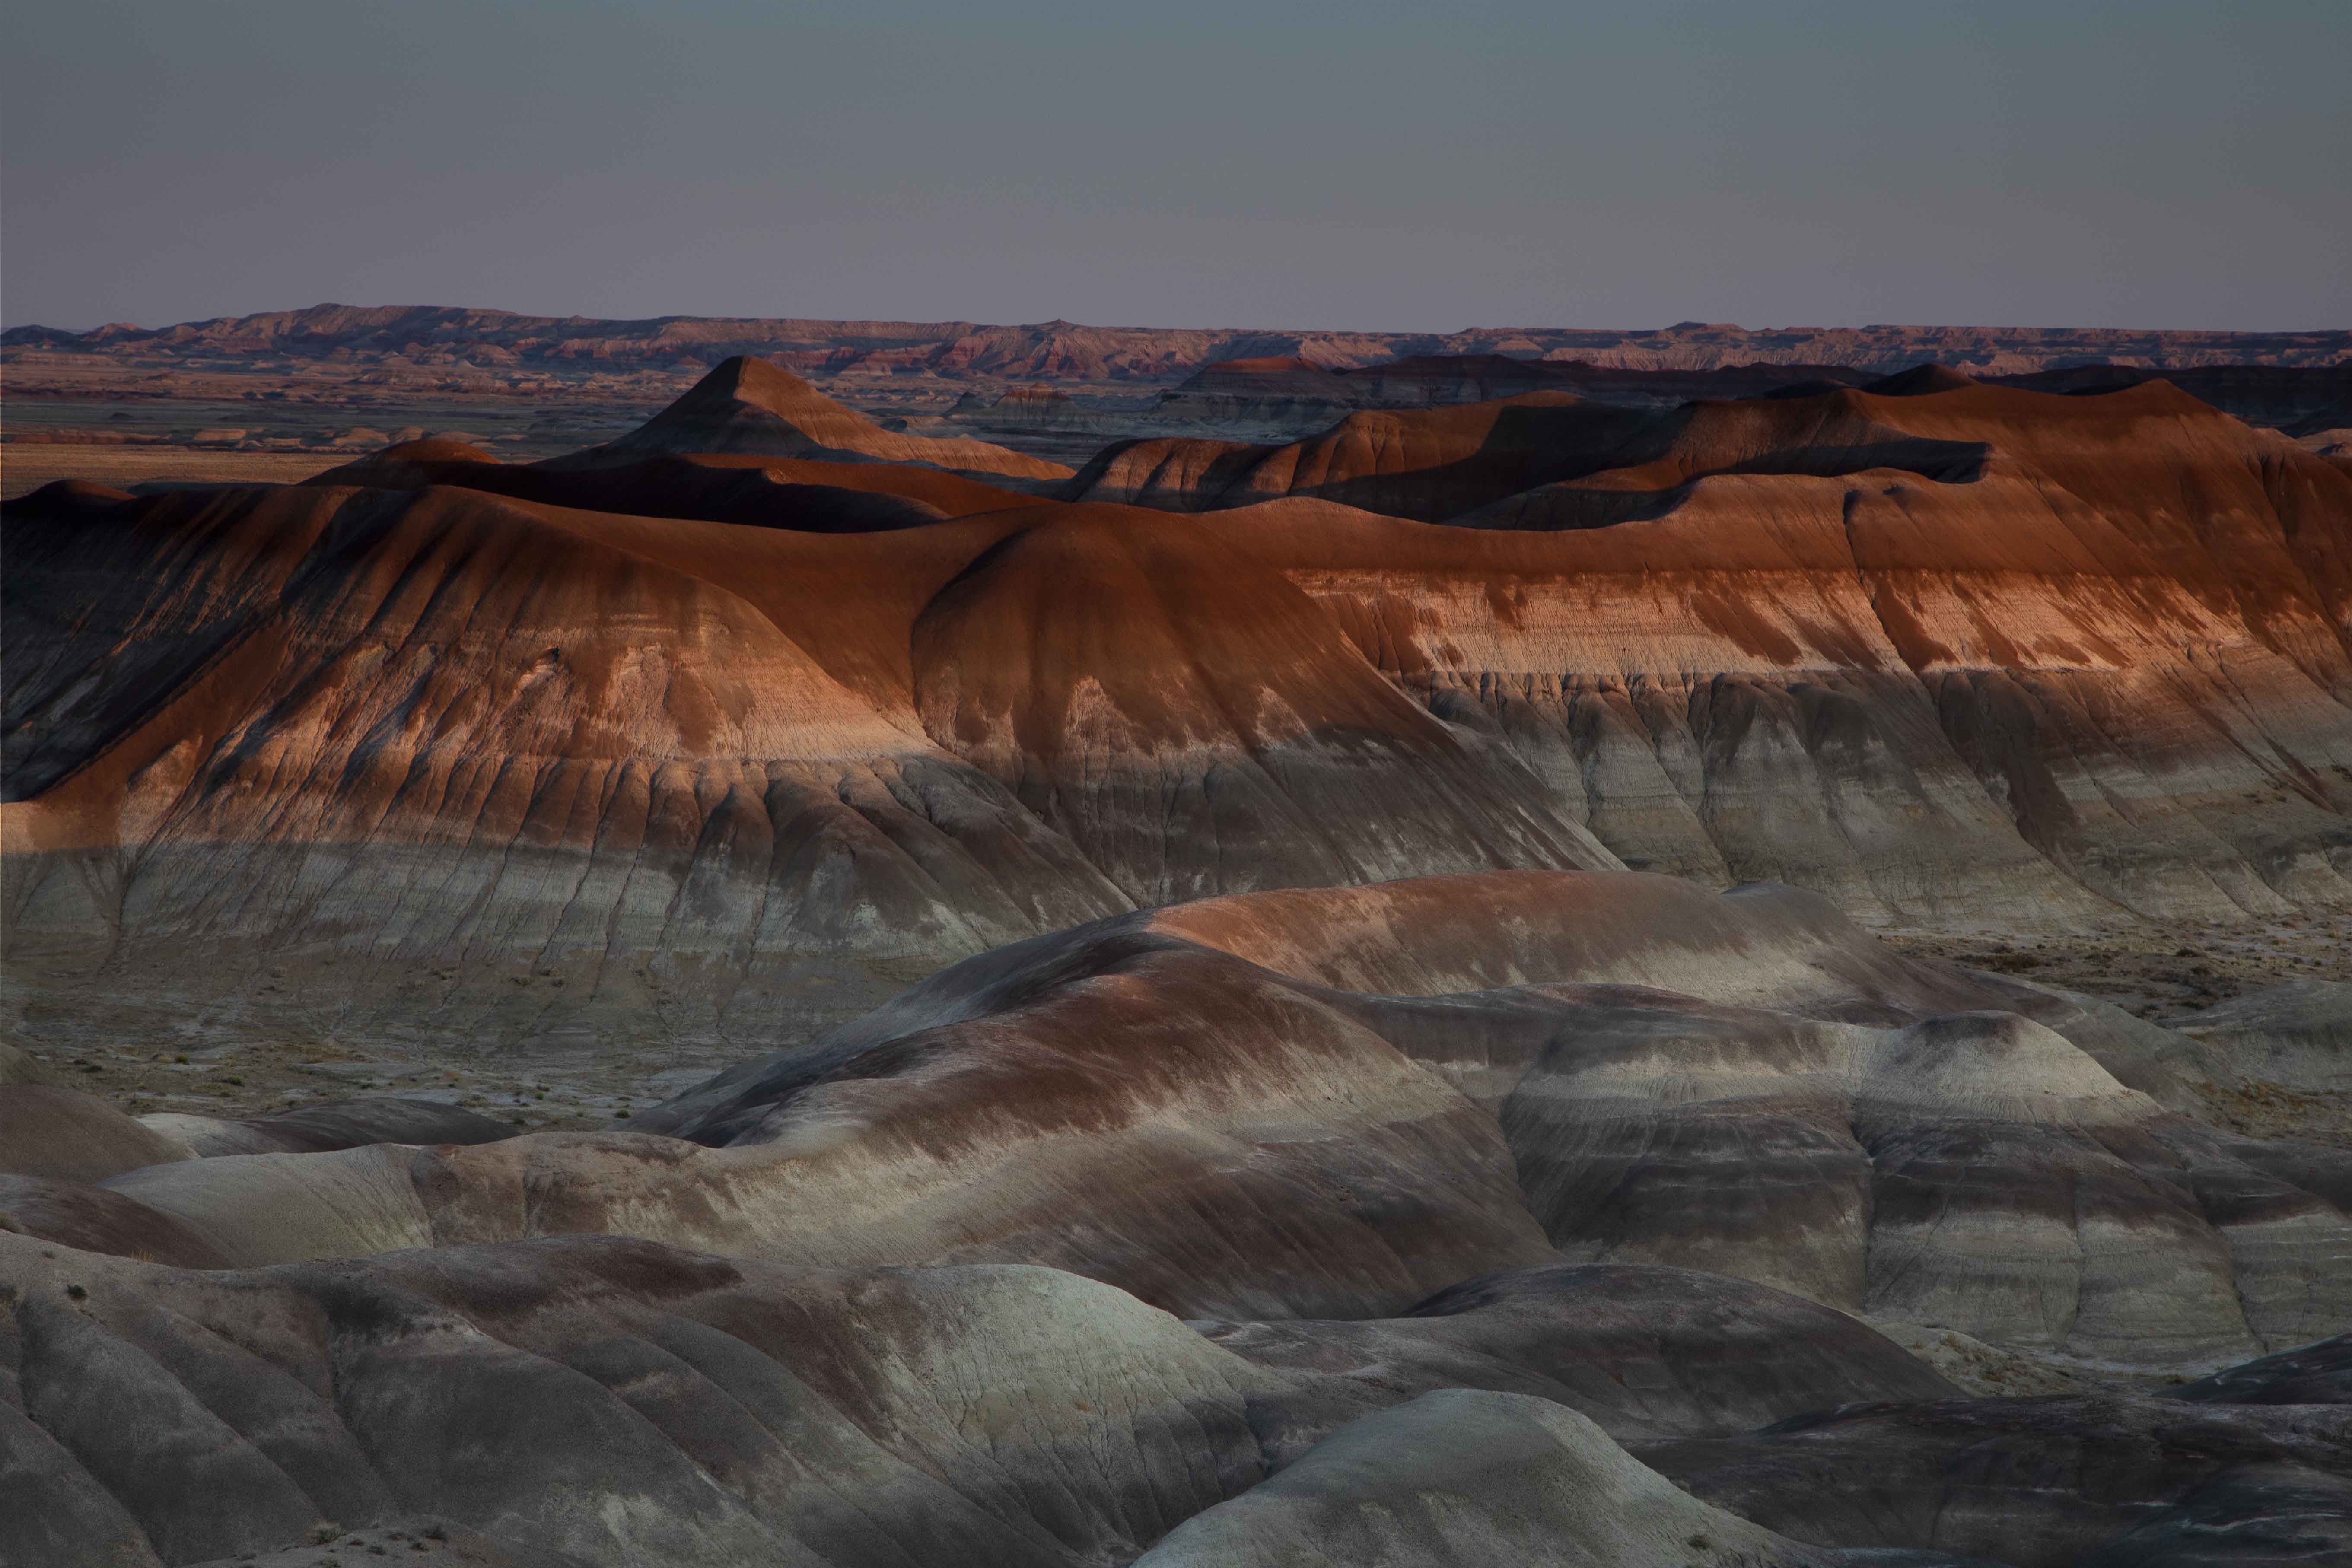 Sunrise at the Little Painted Desert, a beautifully abandoned county park in northern Arizona